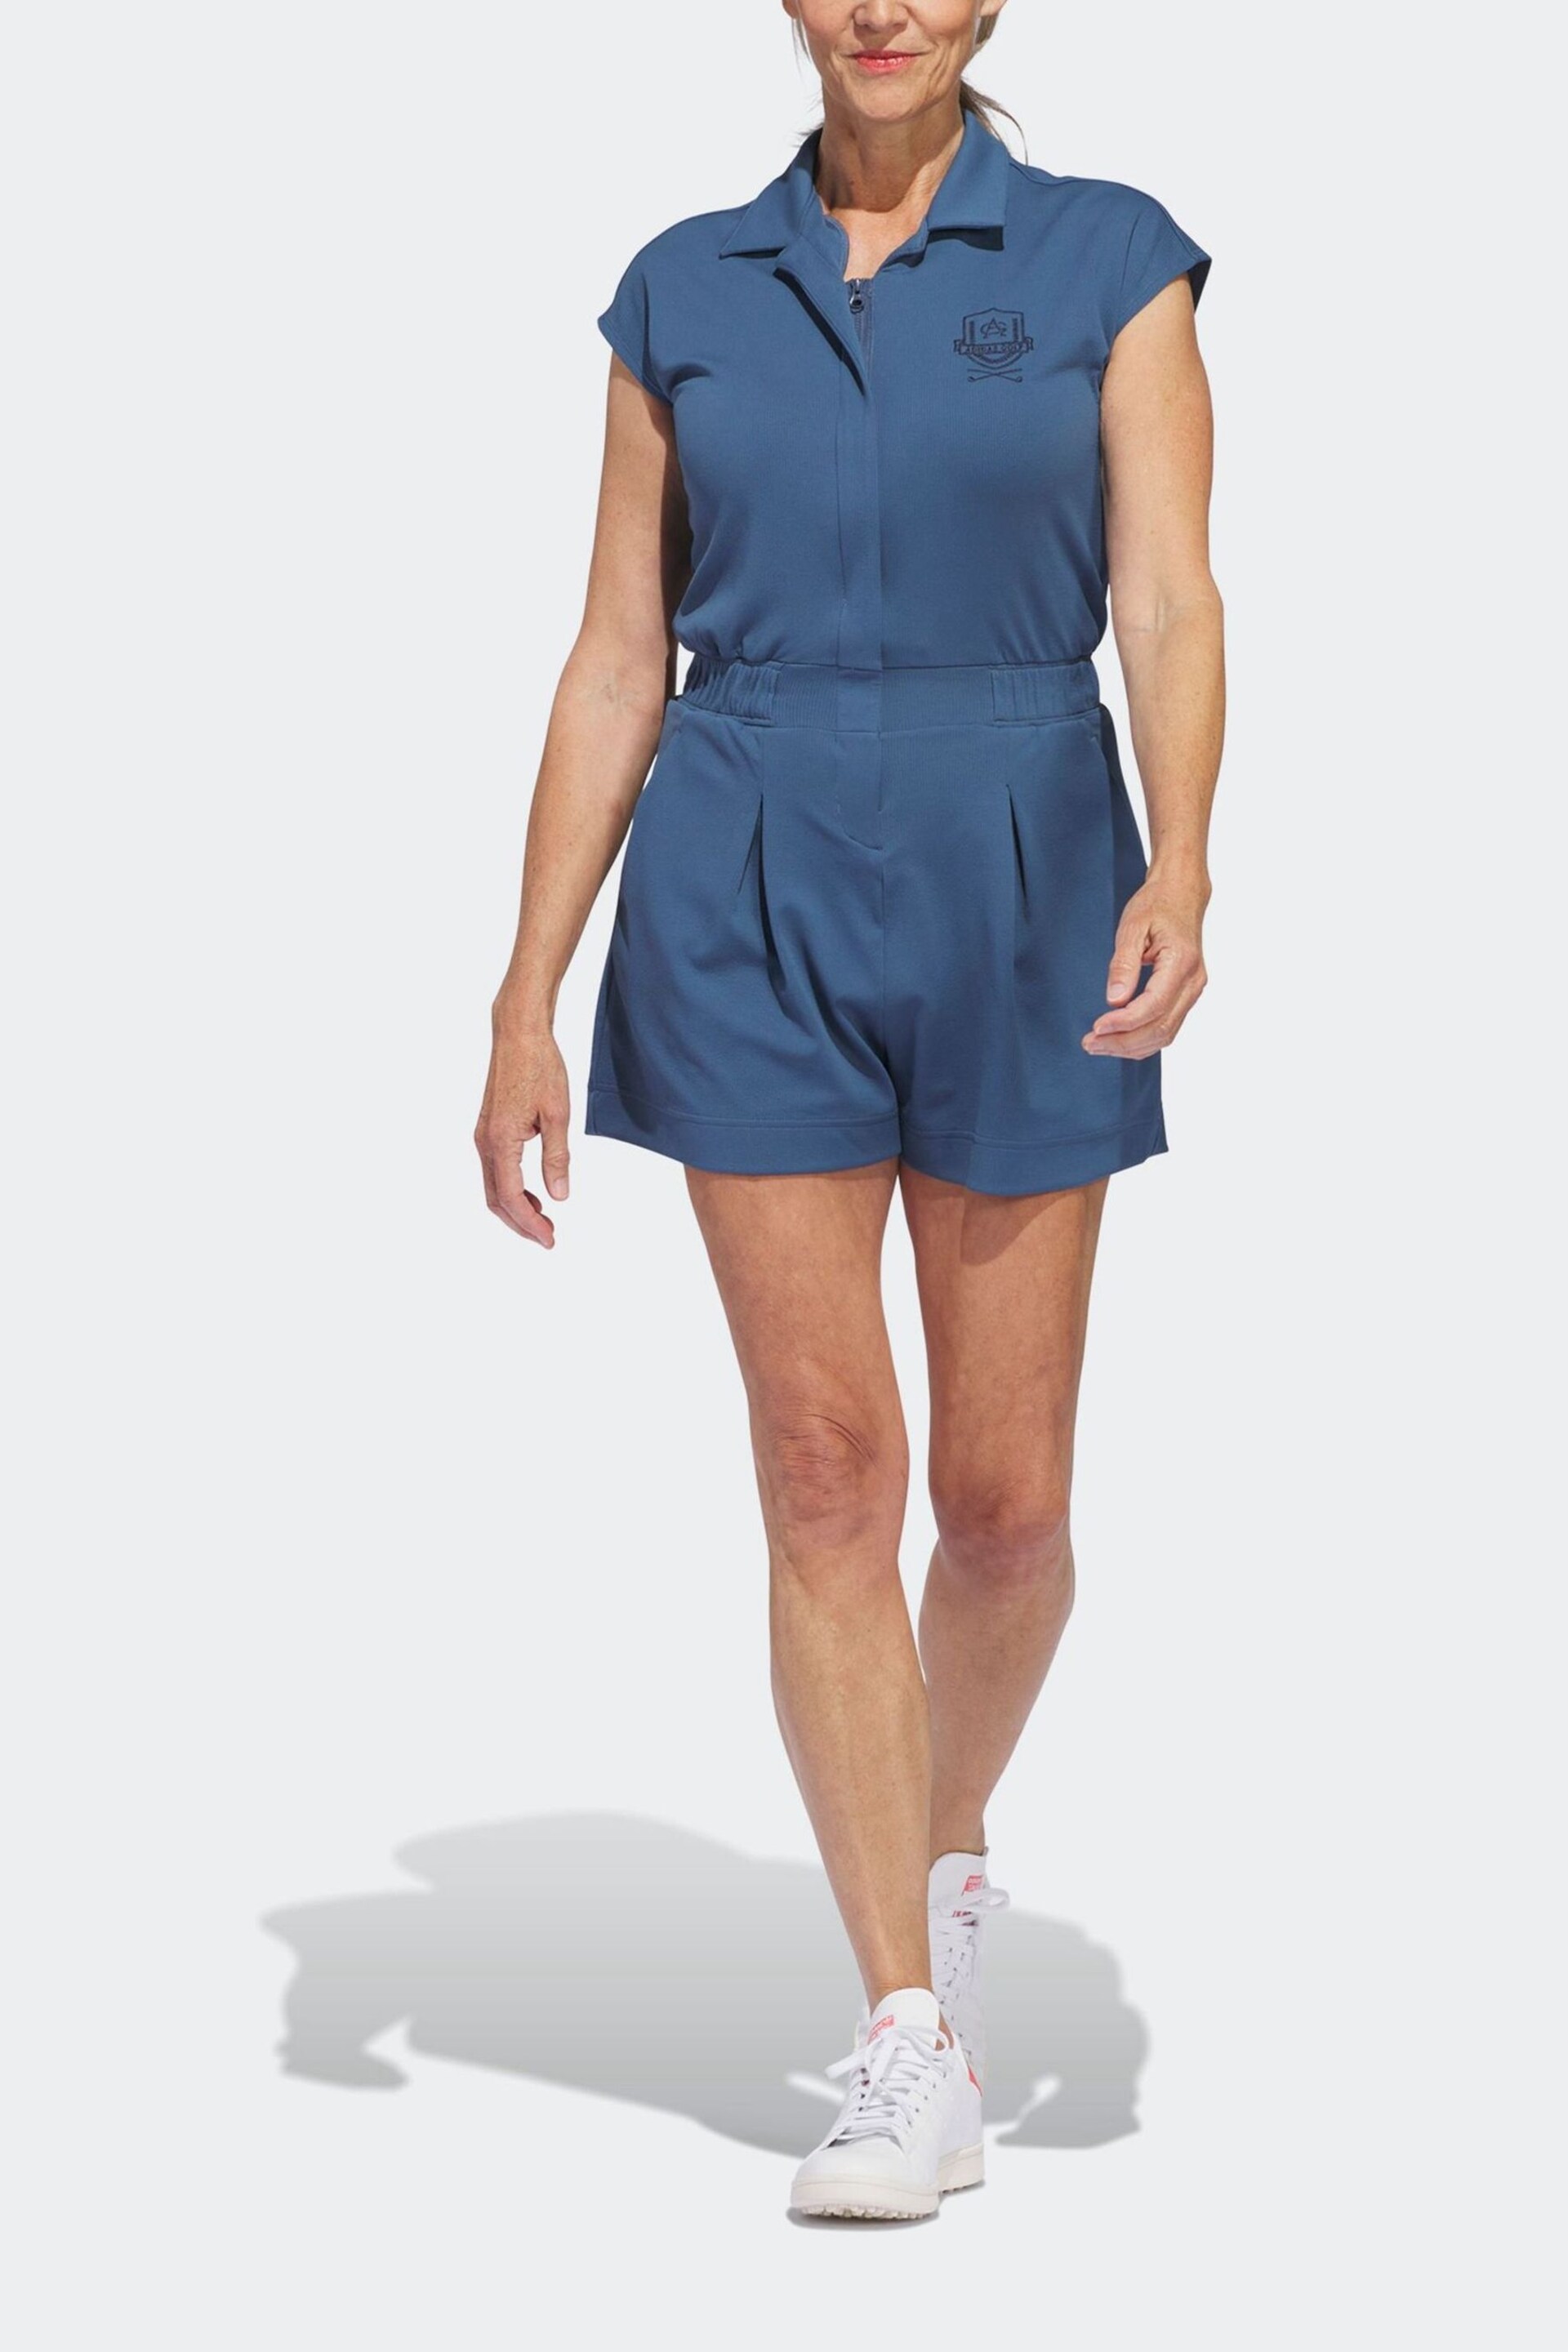 adidas Golf Navy Go-To Playsuit - Image 4 of 7